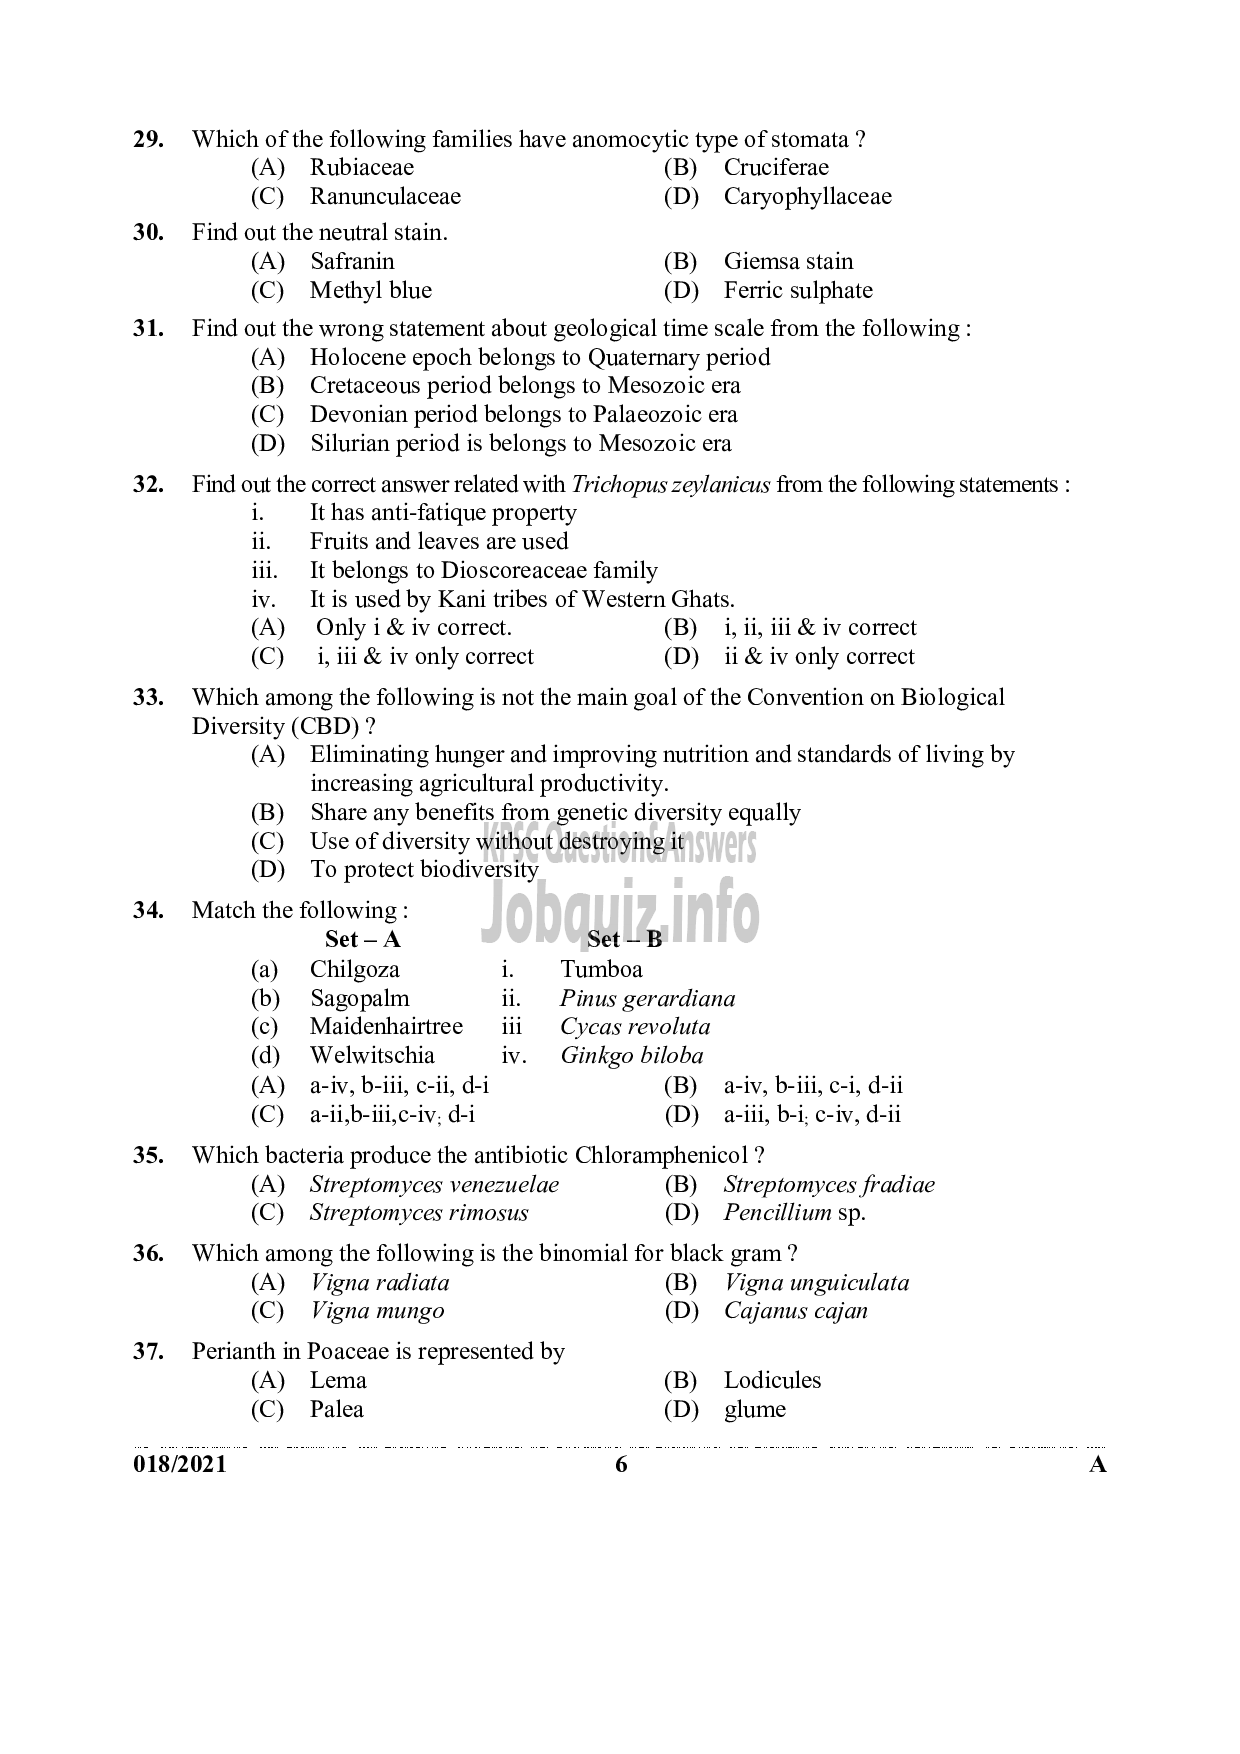 Kerala PSC Question Paper - SCIENTIFIC OFFICER (BIOLOGY) -KERALA POLICE SERVICE (FORENSIC SCIENCE LABORATORY)-6